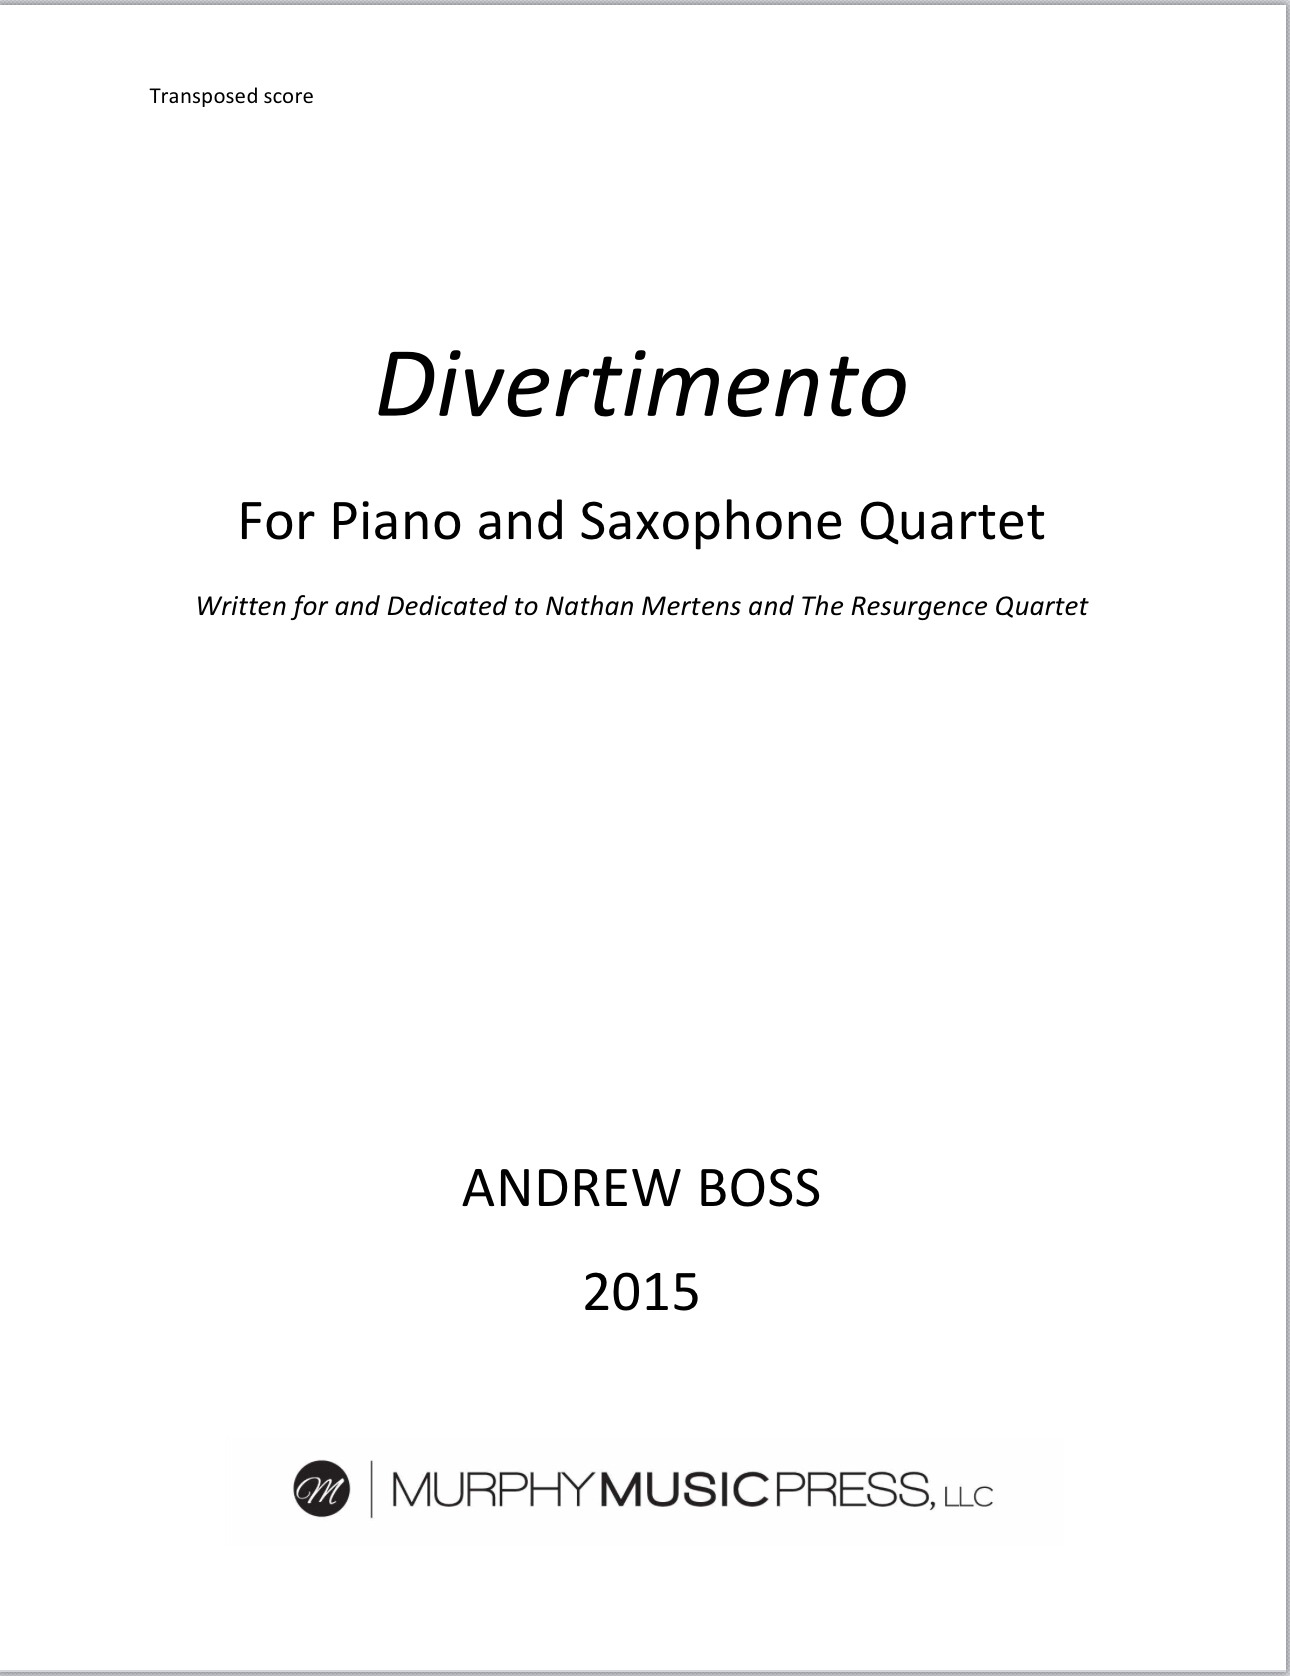 Divertimento by Andrew Boss